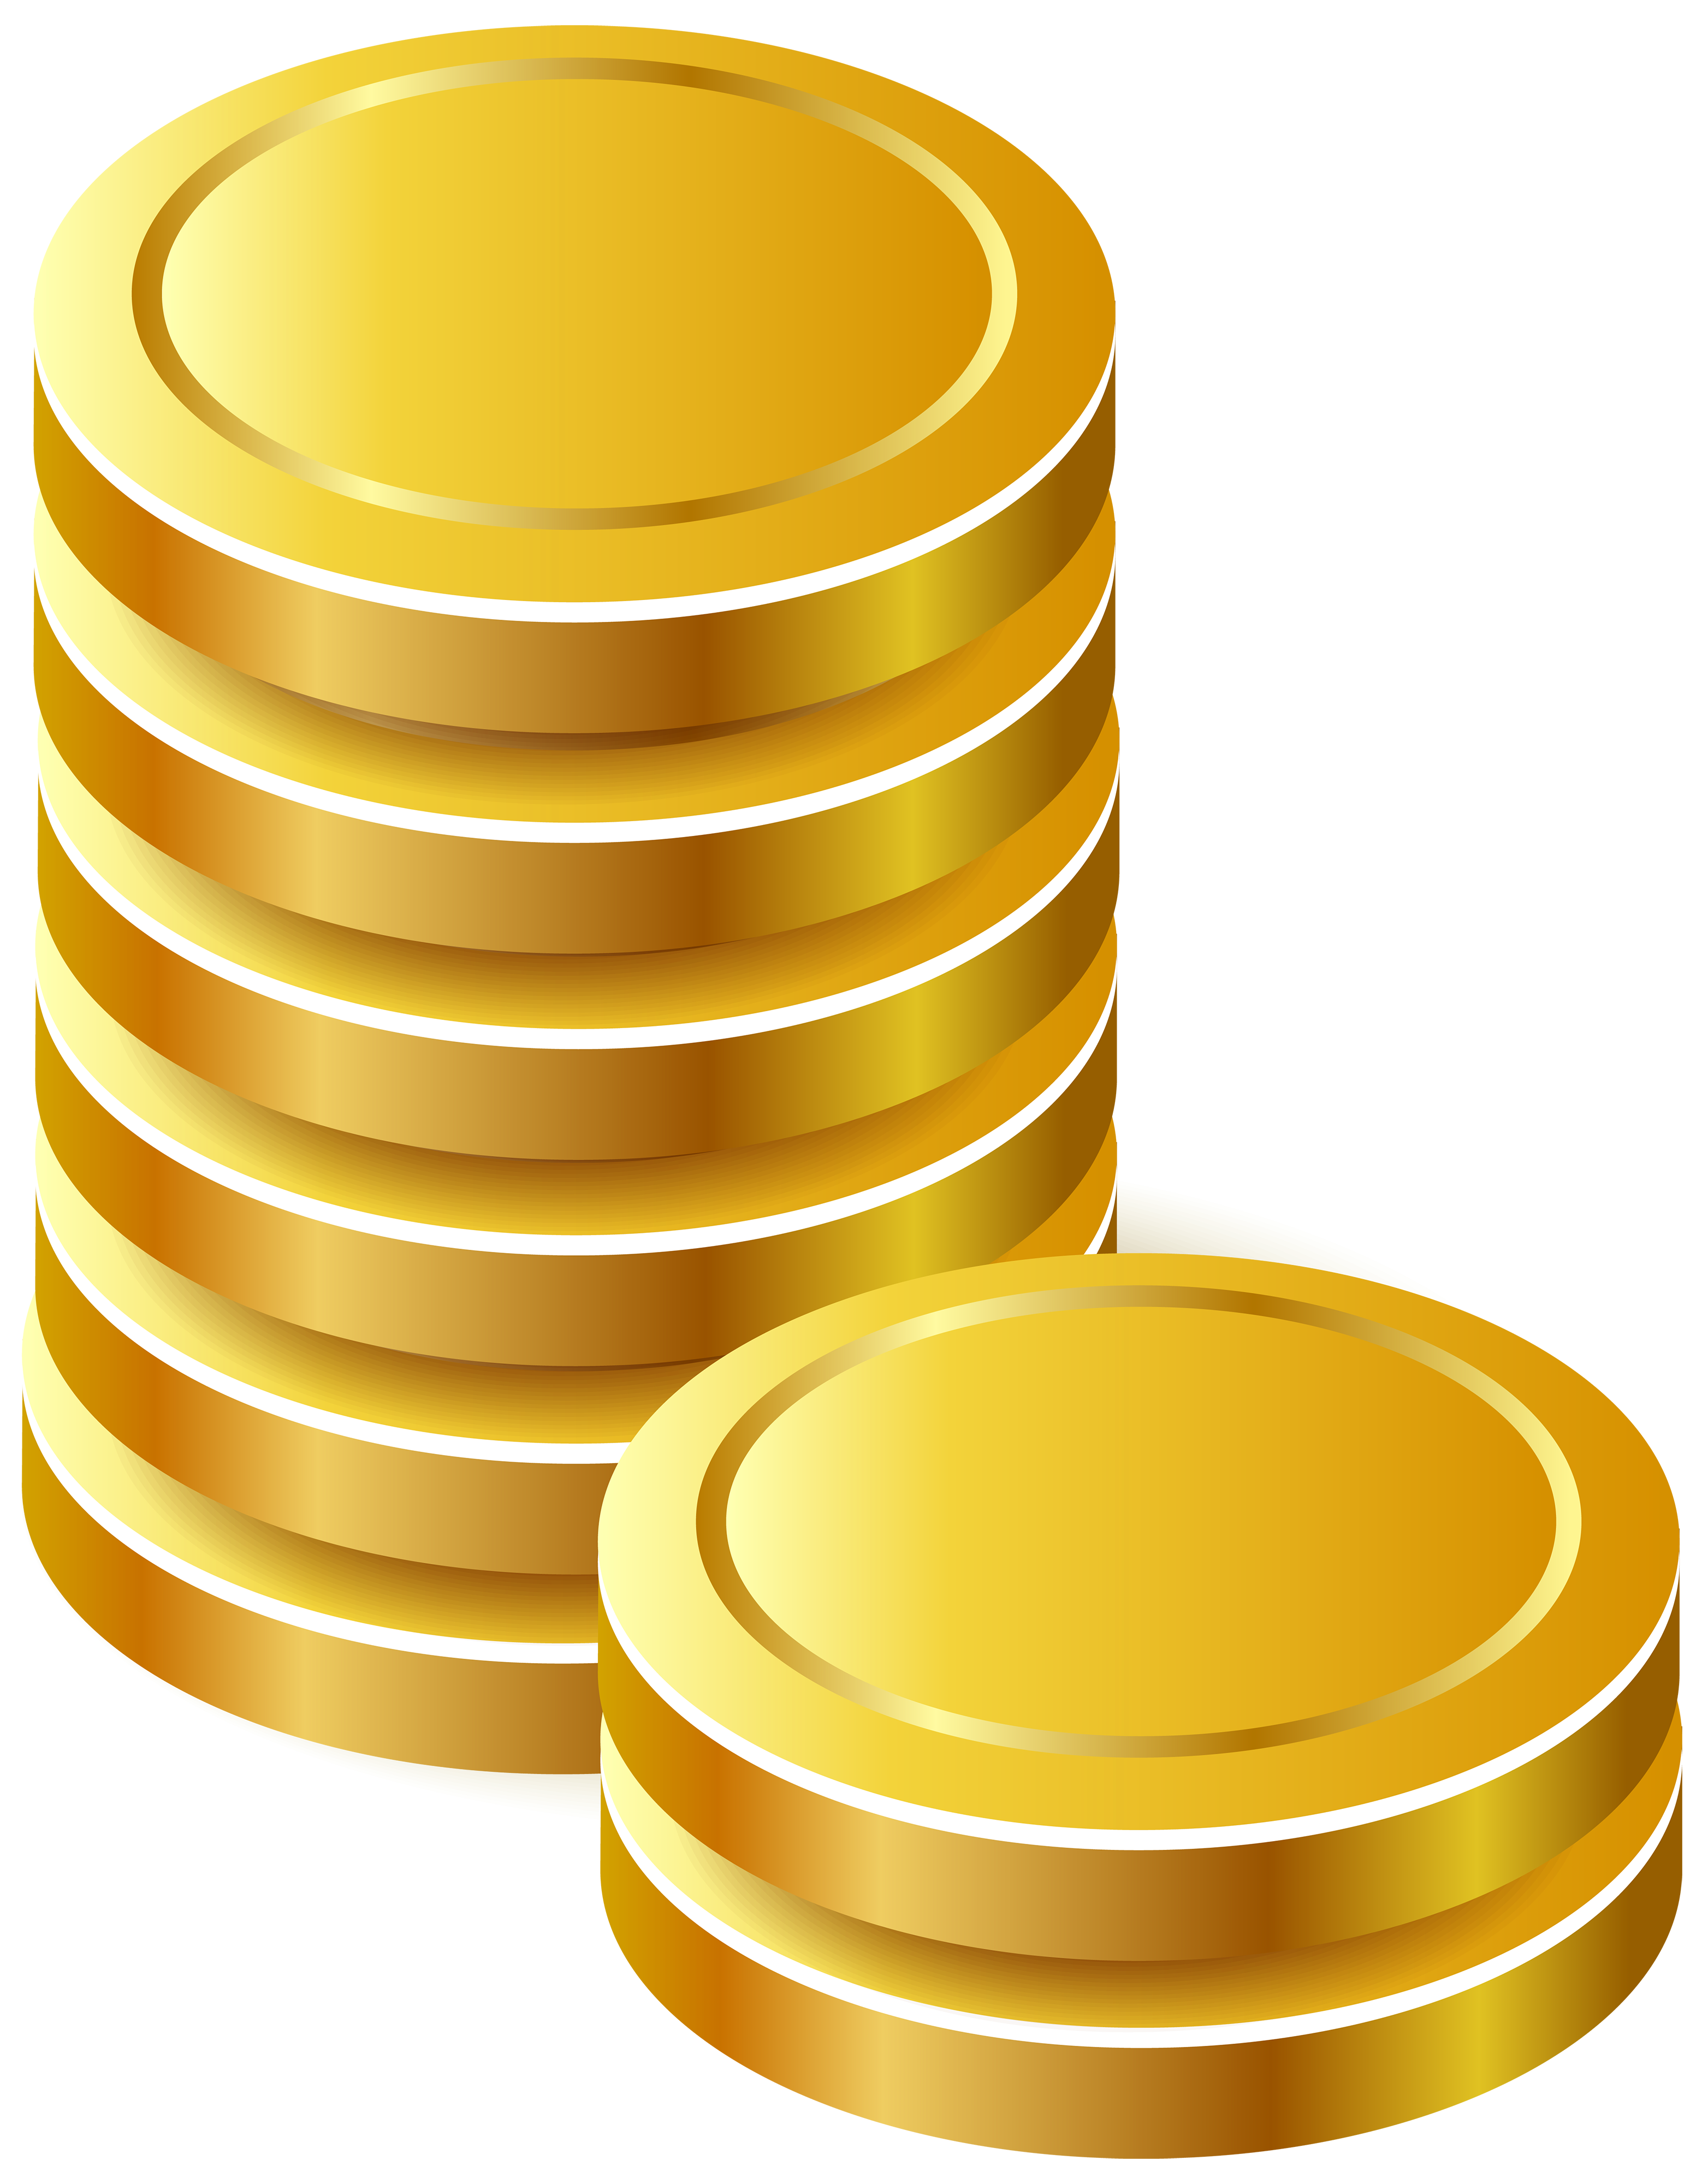 Coin PNG HD-PlusPNG.com-3000